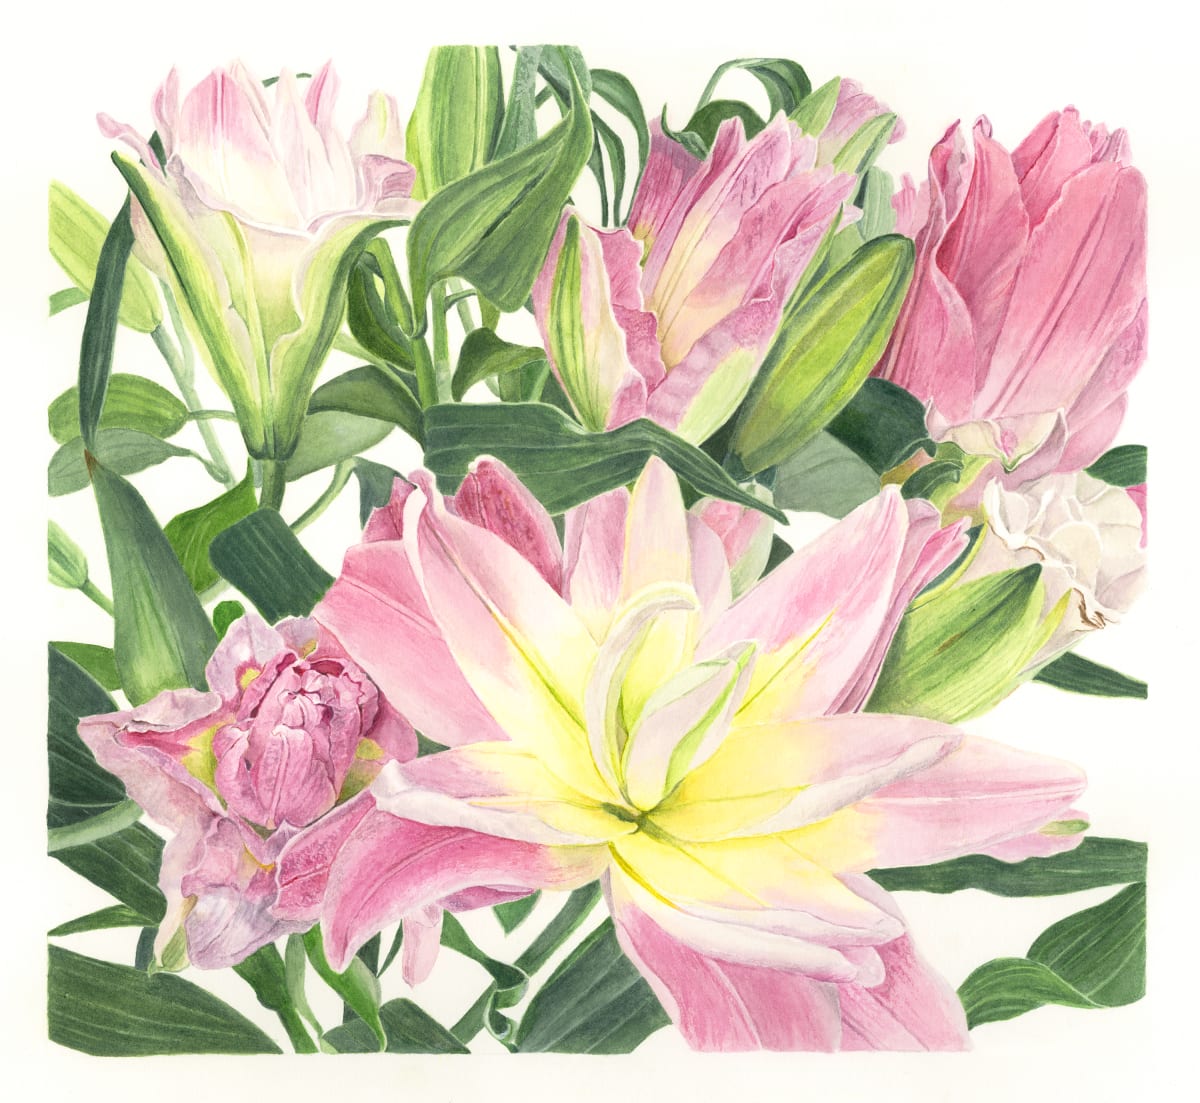 Lots of Lilies by Sally Jacobs 